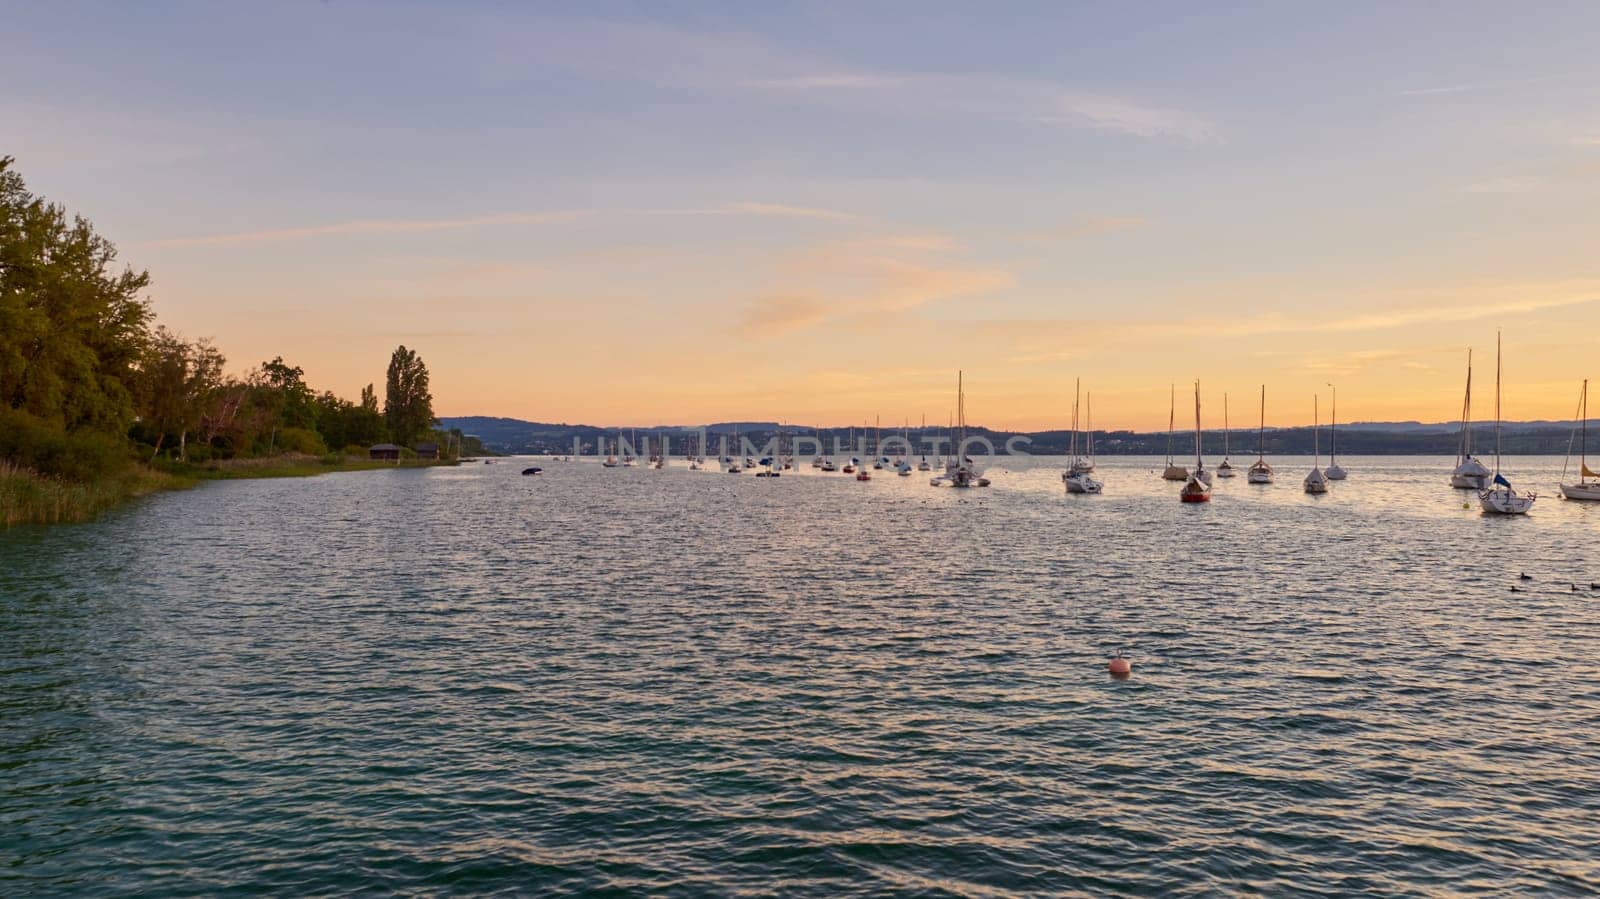 Bodensee Lake Panorama. Evening, twilight, setting sun, picturesque landscape, serene waters, boats and yachts at the dock, beautiful sky with clouds reflecting in the water, riverside at dusk, showcasing the coexistence of technology and production with the environment.